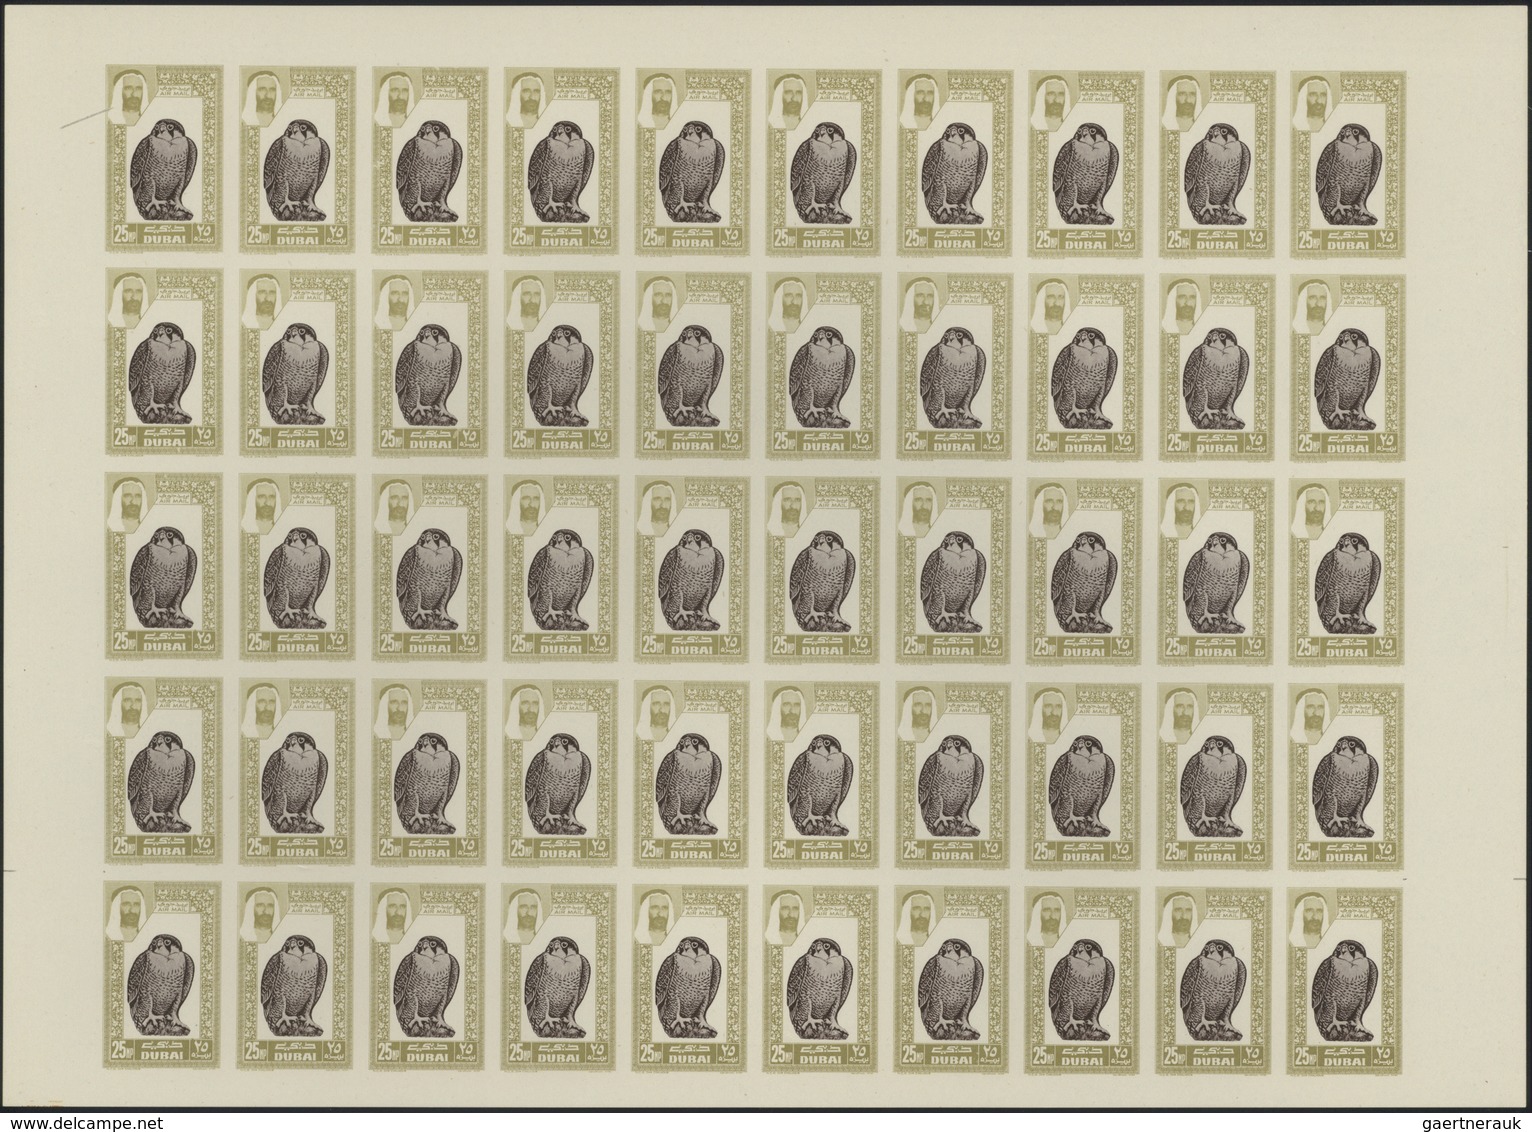 08382 Dubai: 1963, Airmail Definitives "Falcon", 20np. to 1r. imperforate, complete set of eight values, s